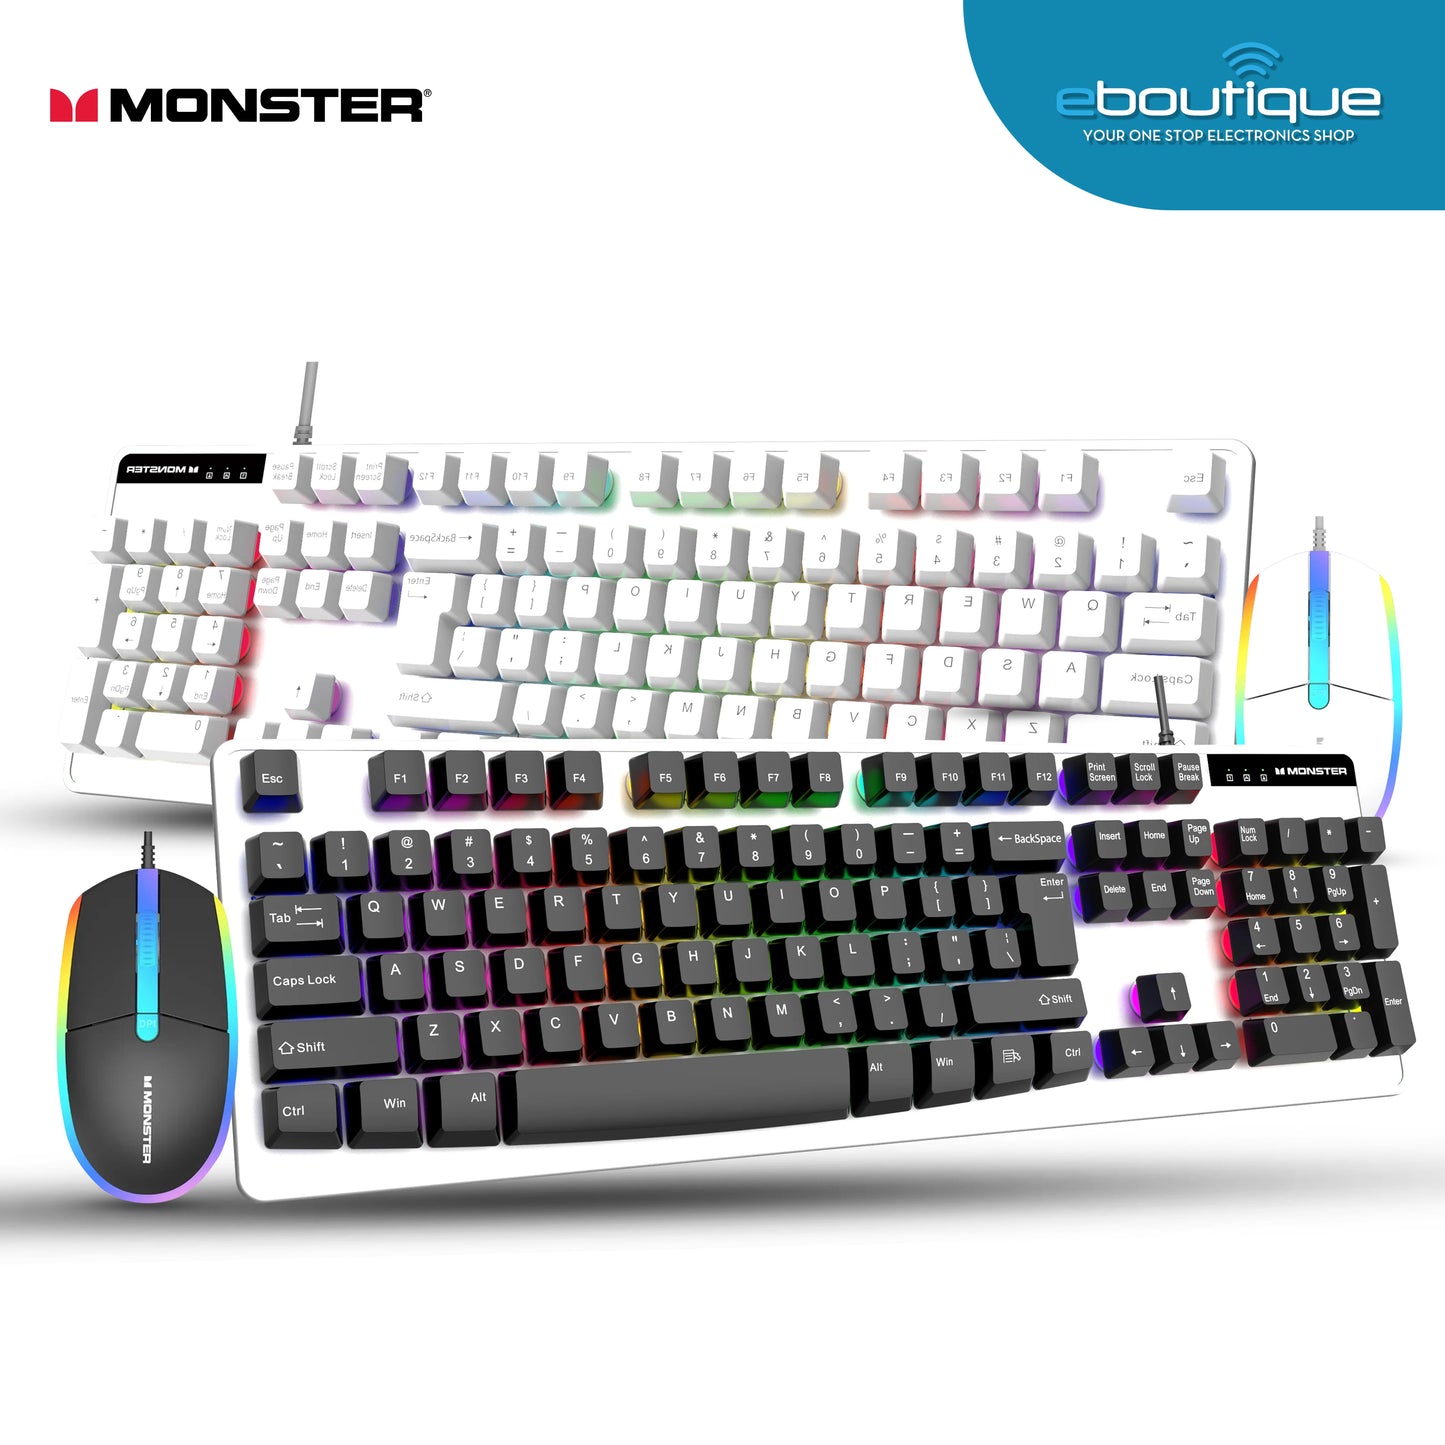 Monster Airmars KM1 Pro Keyboard and Mouse Combo